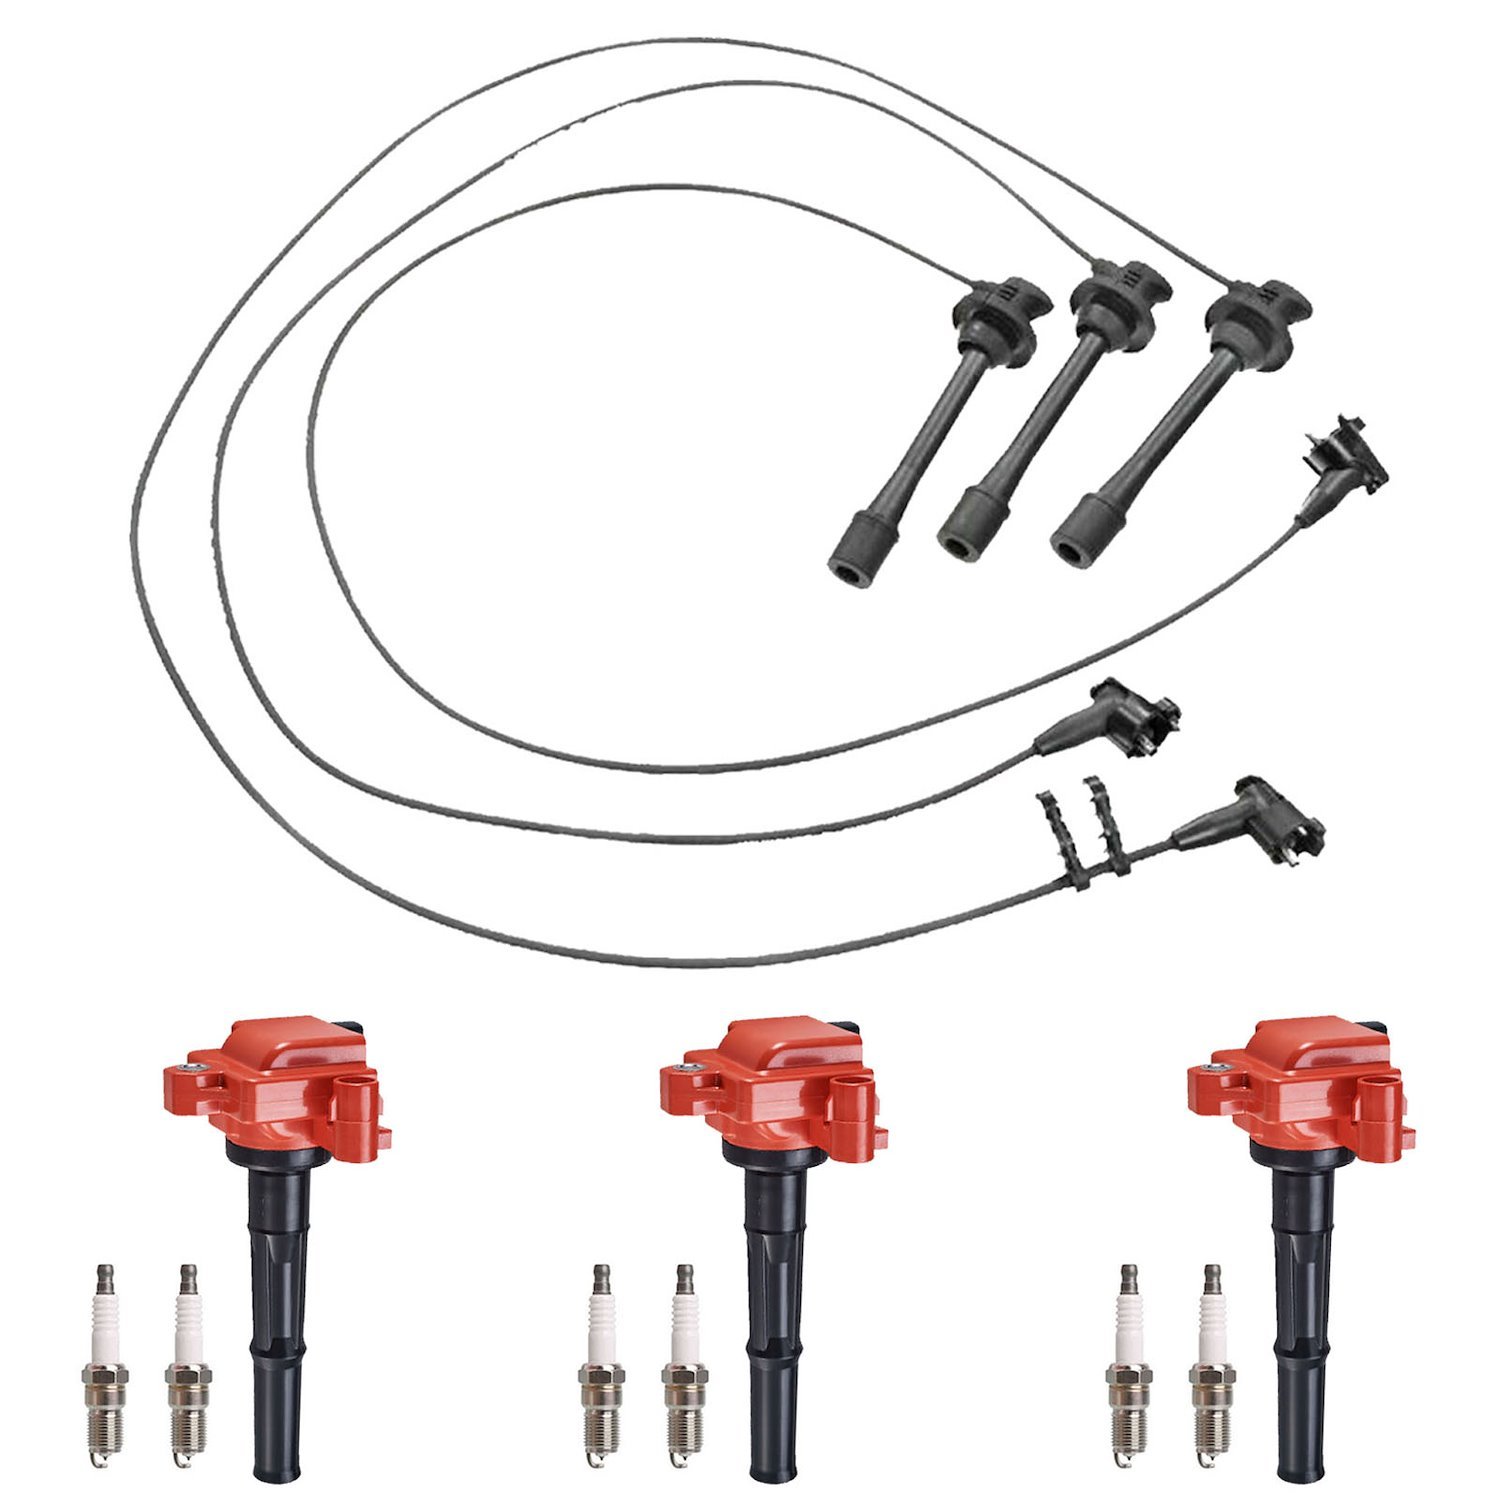 High-Performance Ignition Coil, Spark Plug, and Spark Plug Wire Kit for Toyota Tacoma 3.4L